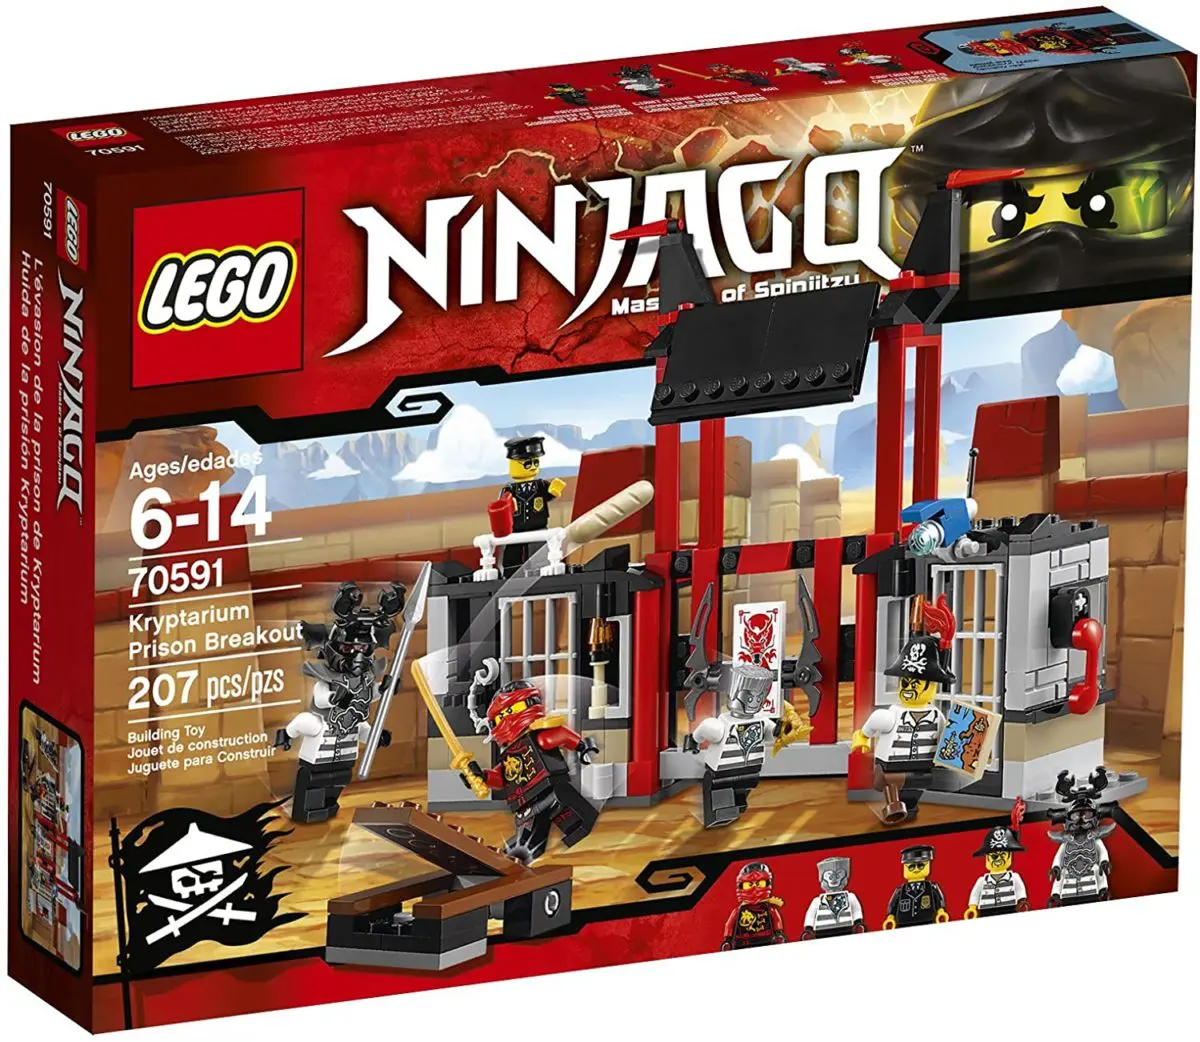 LEGO Ninjago Kryptarium Prison Breakout Prison Kit - Top Toys and Gifts for Nine Year Old Boys 1